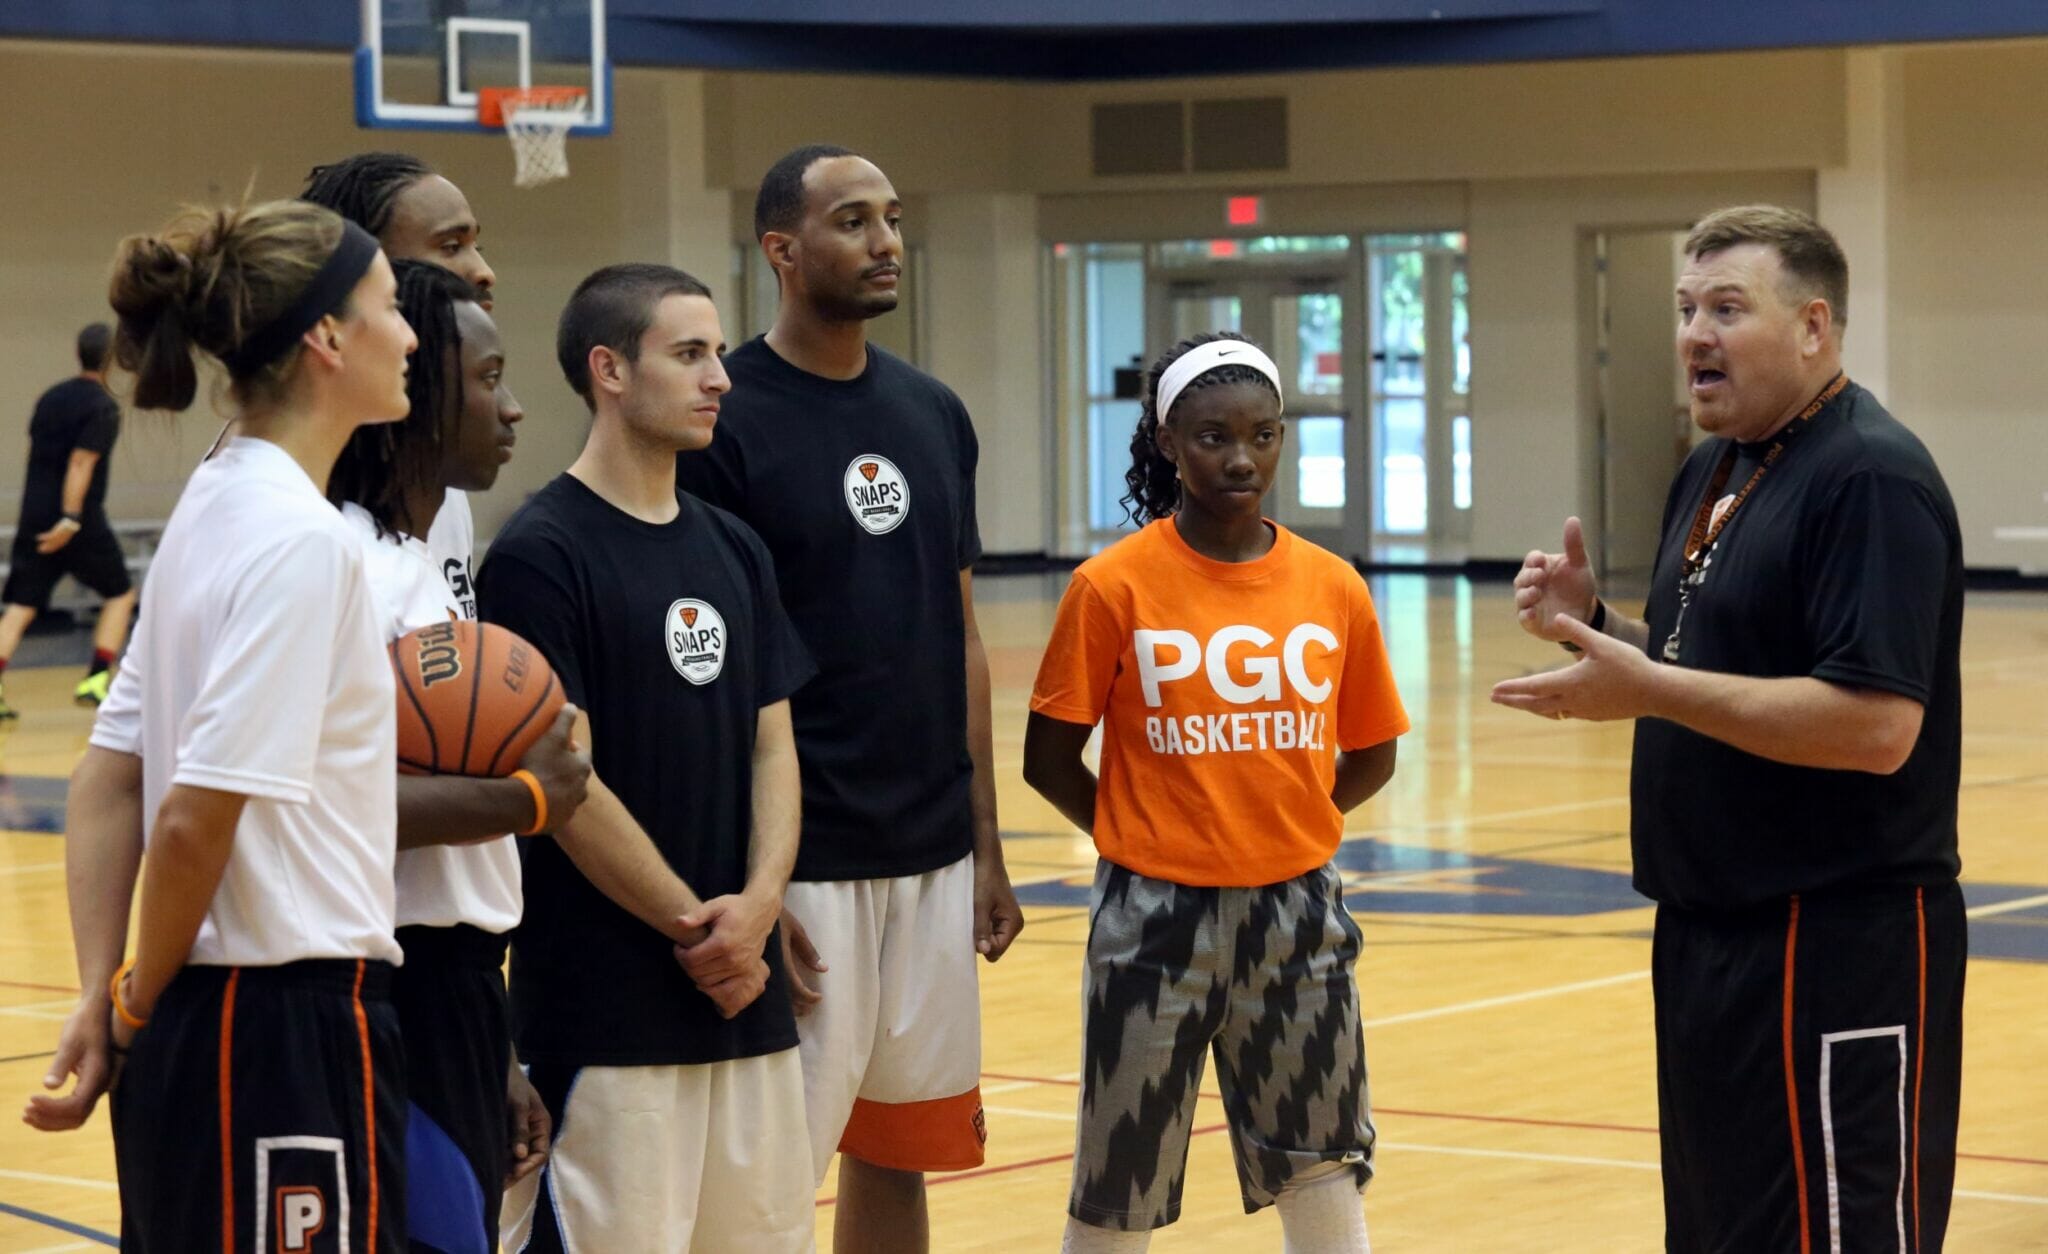 Pro and College PGC Basketball Camps